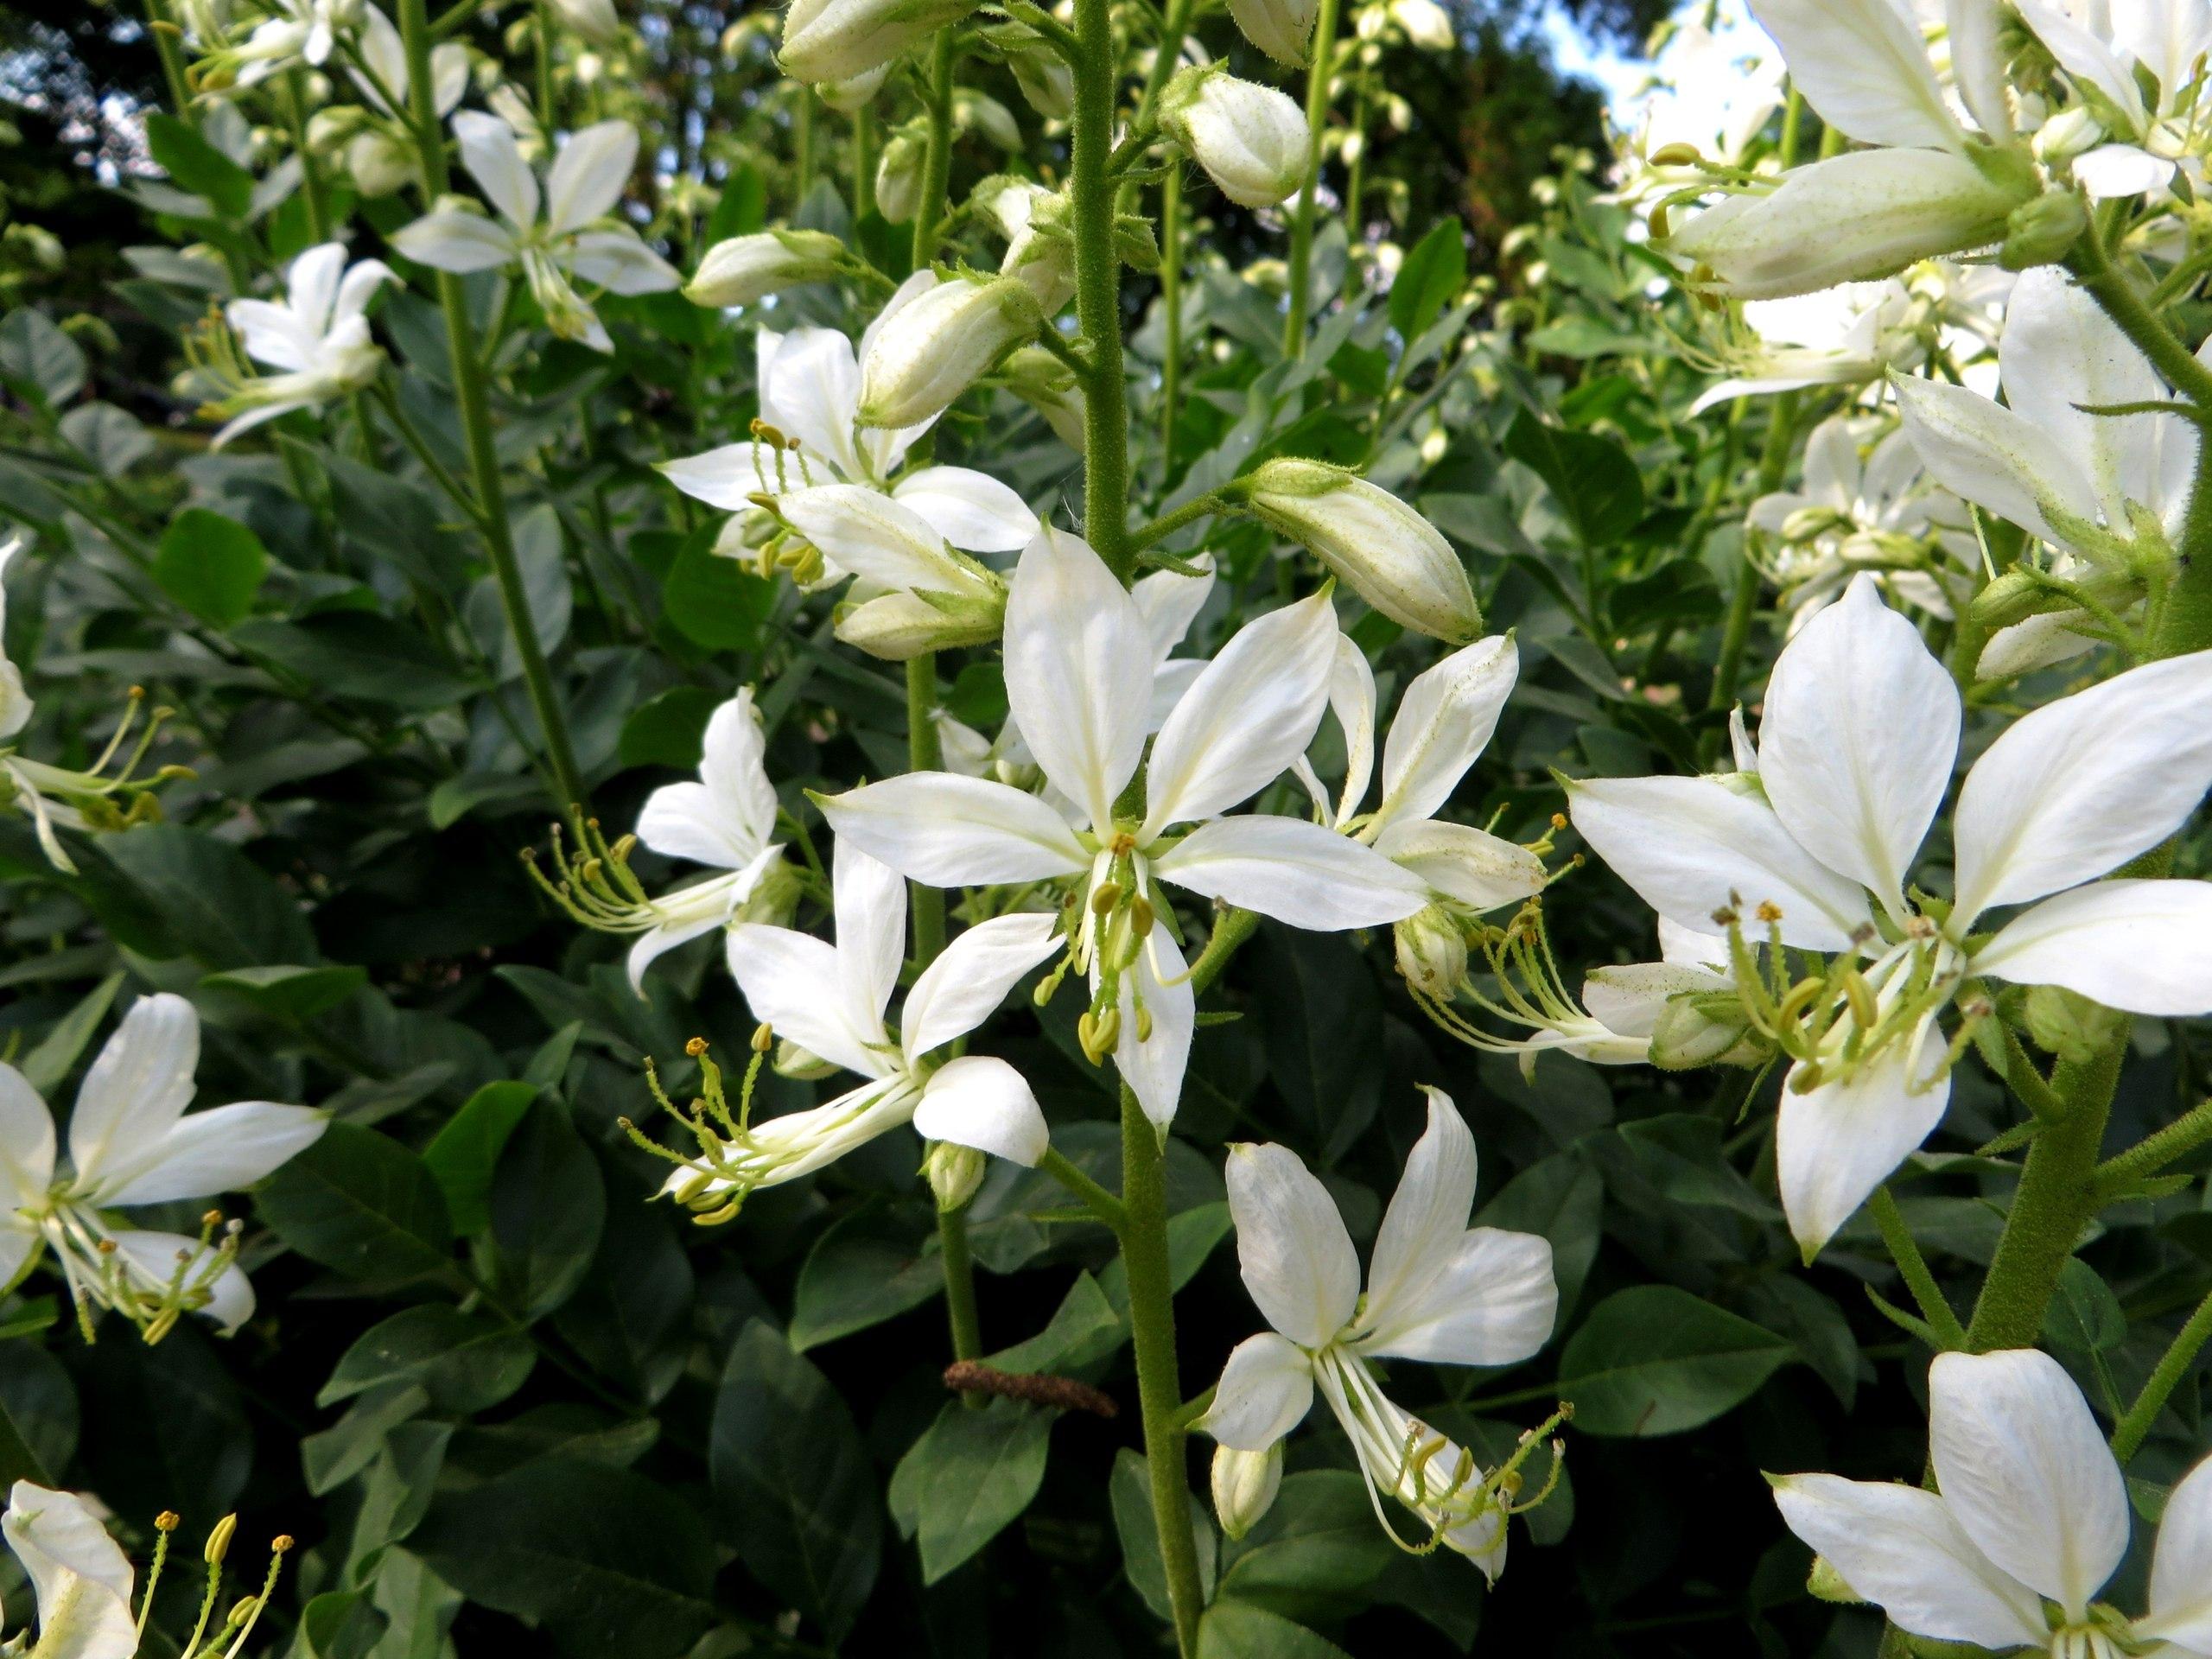 white flowers with lime filaments, yellow anthers, off-white buds, green leaves and stems